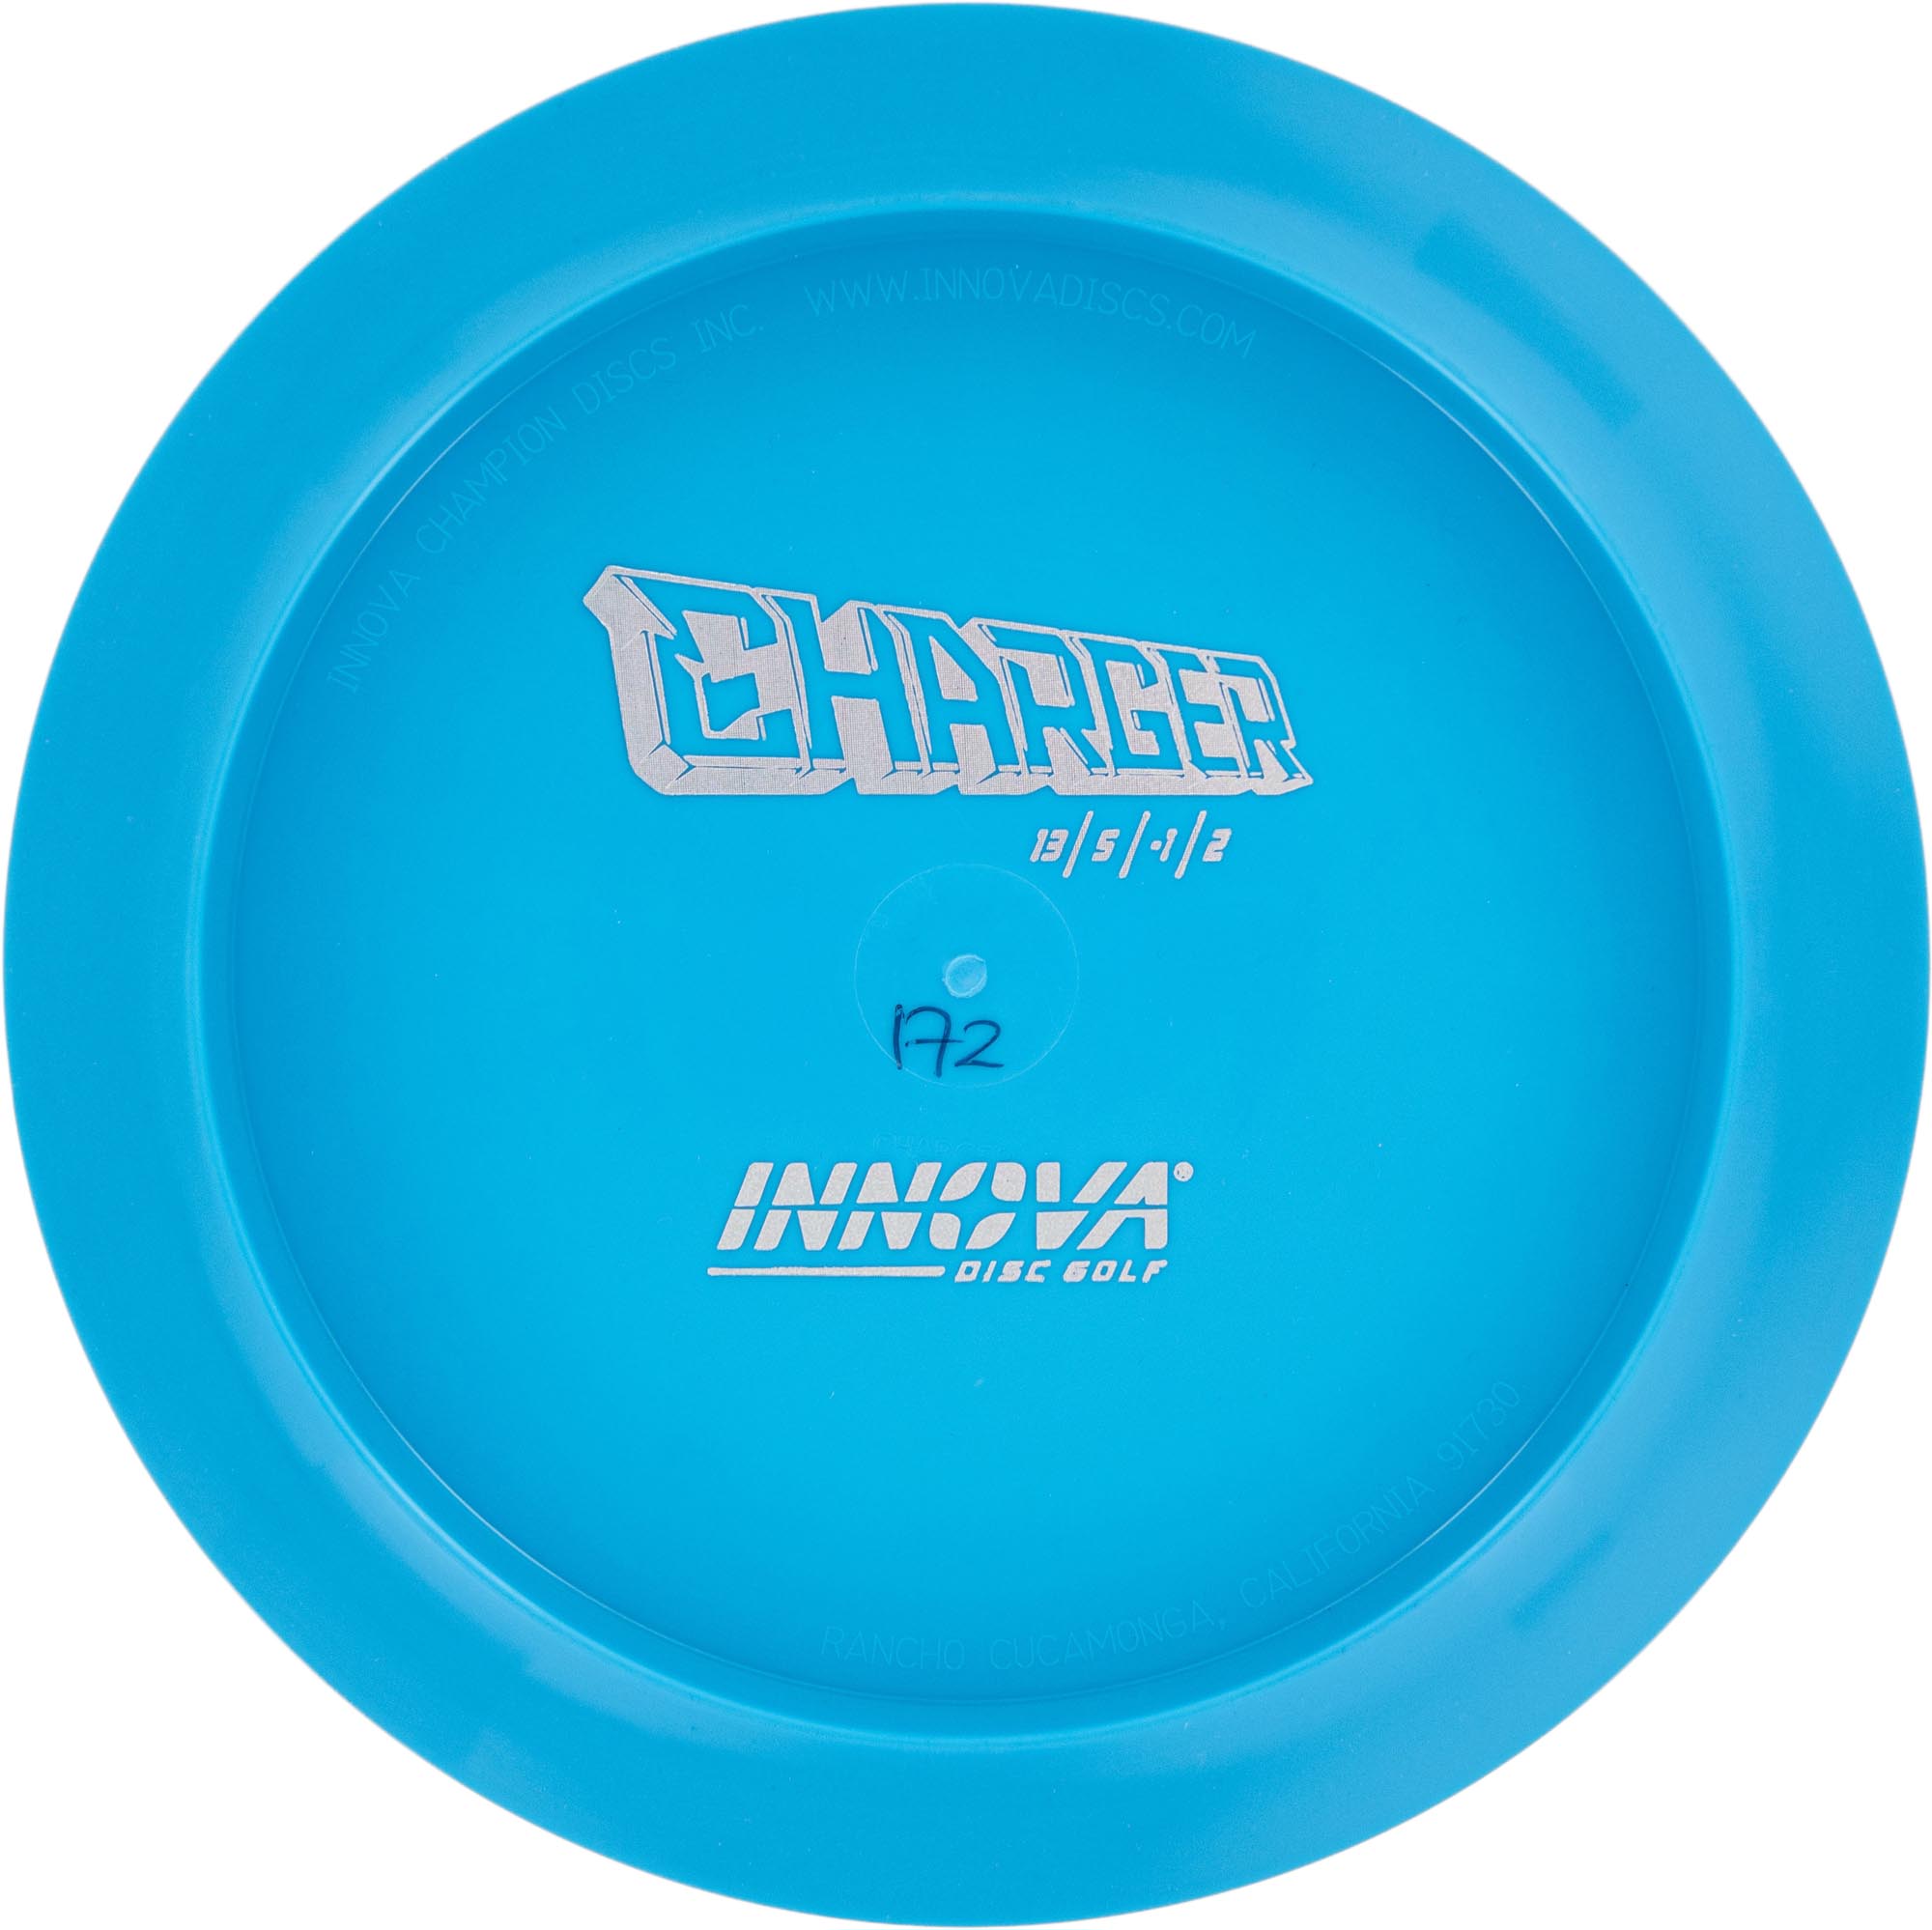 Star Charger (Bottom Stamp) from Disc Golf United